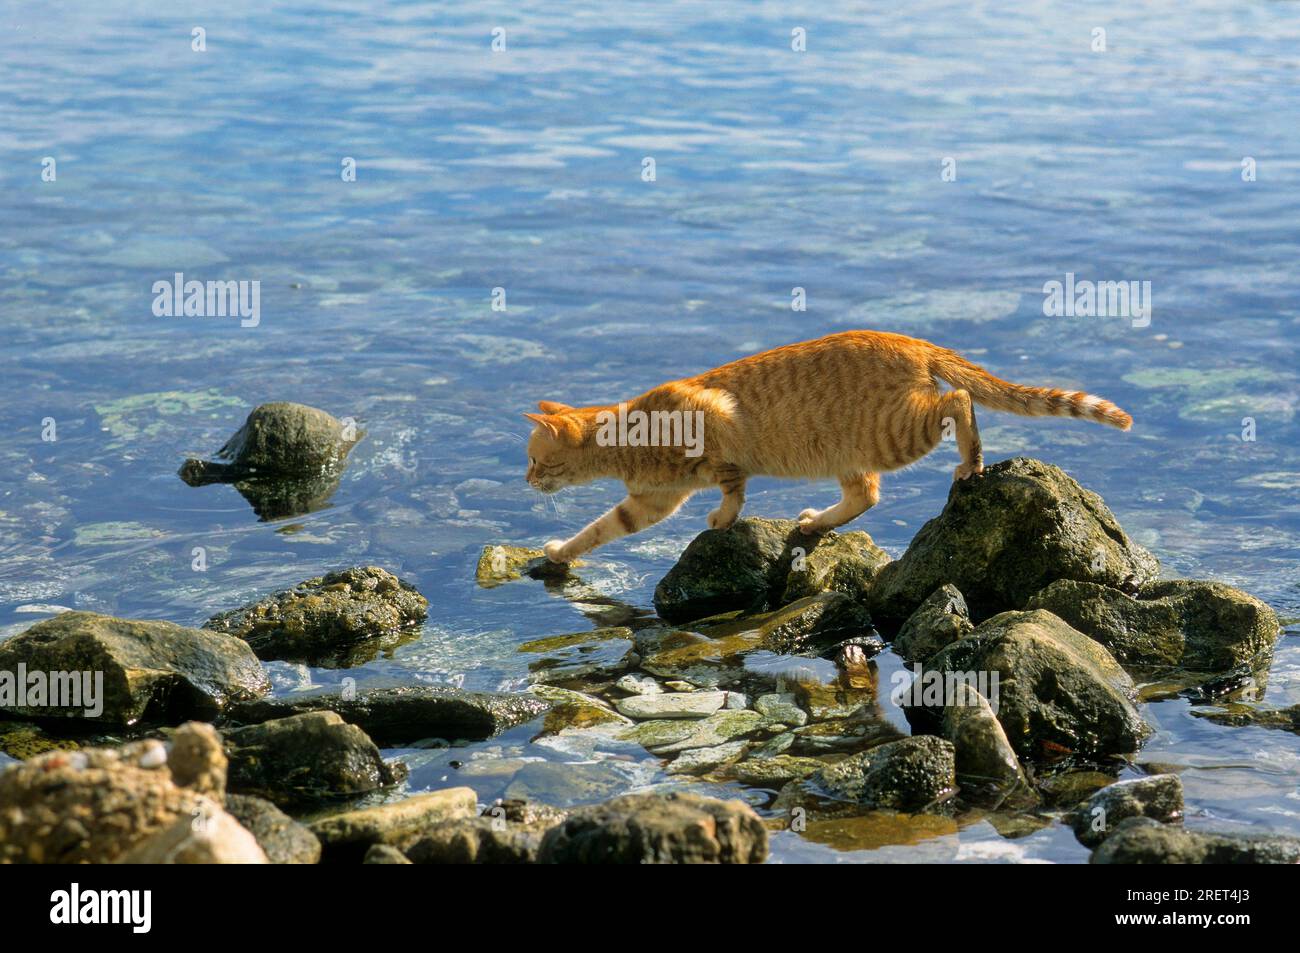 Red cat lurking for fish by the sea Stock Photo